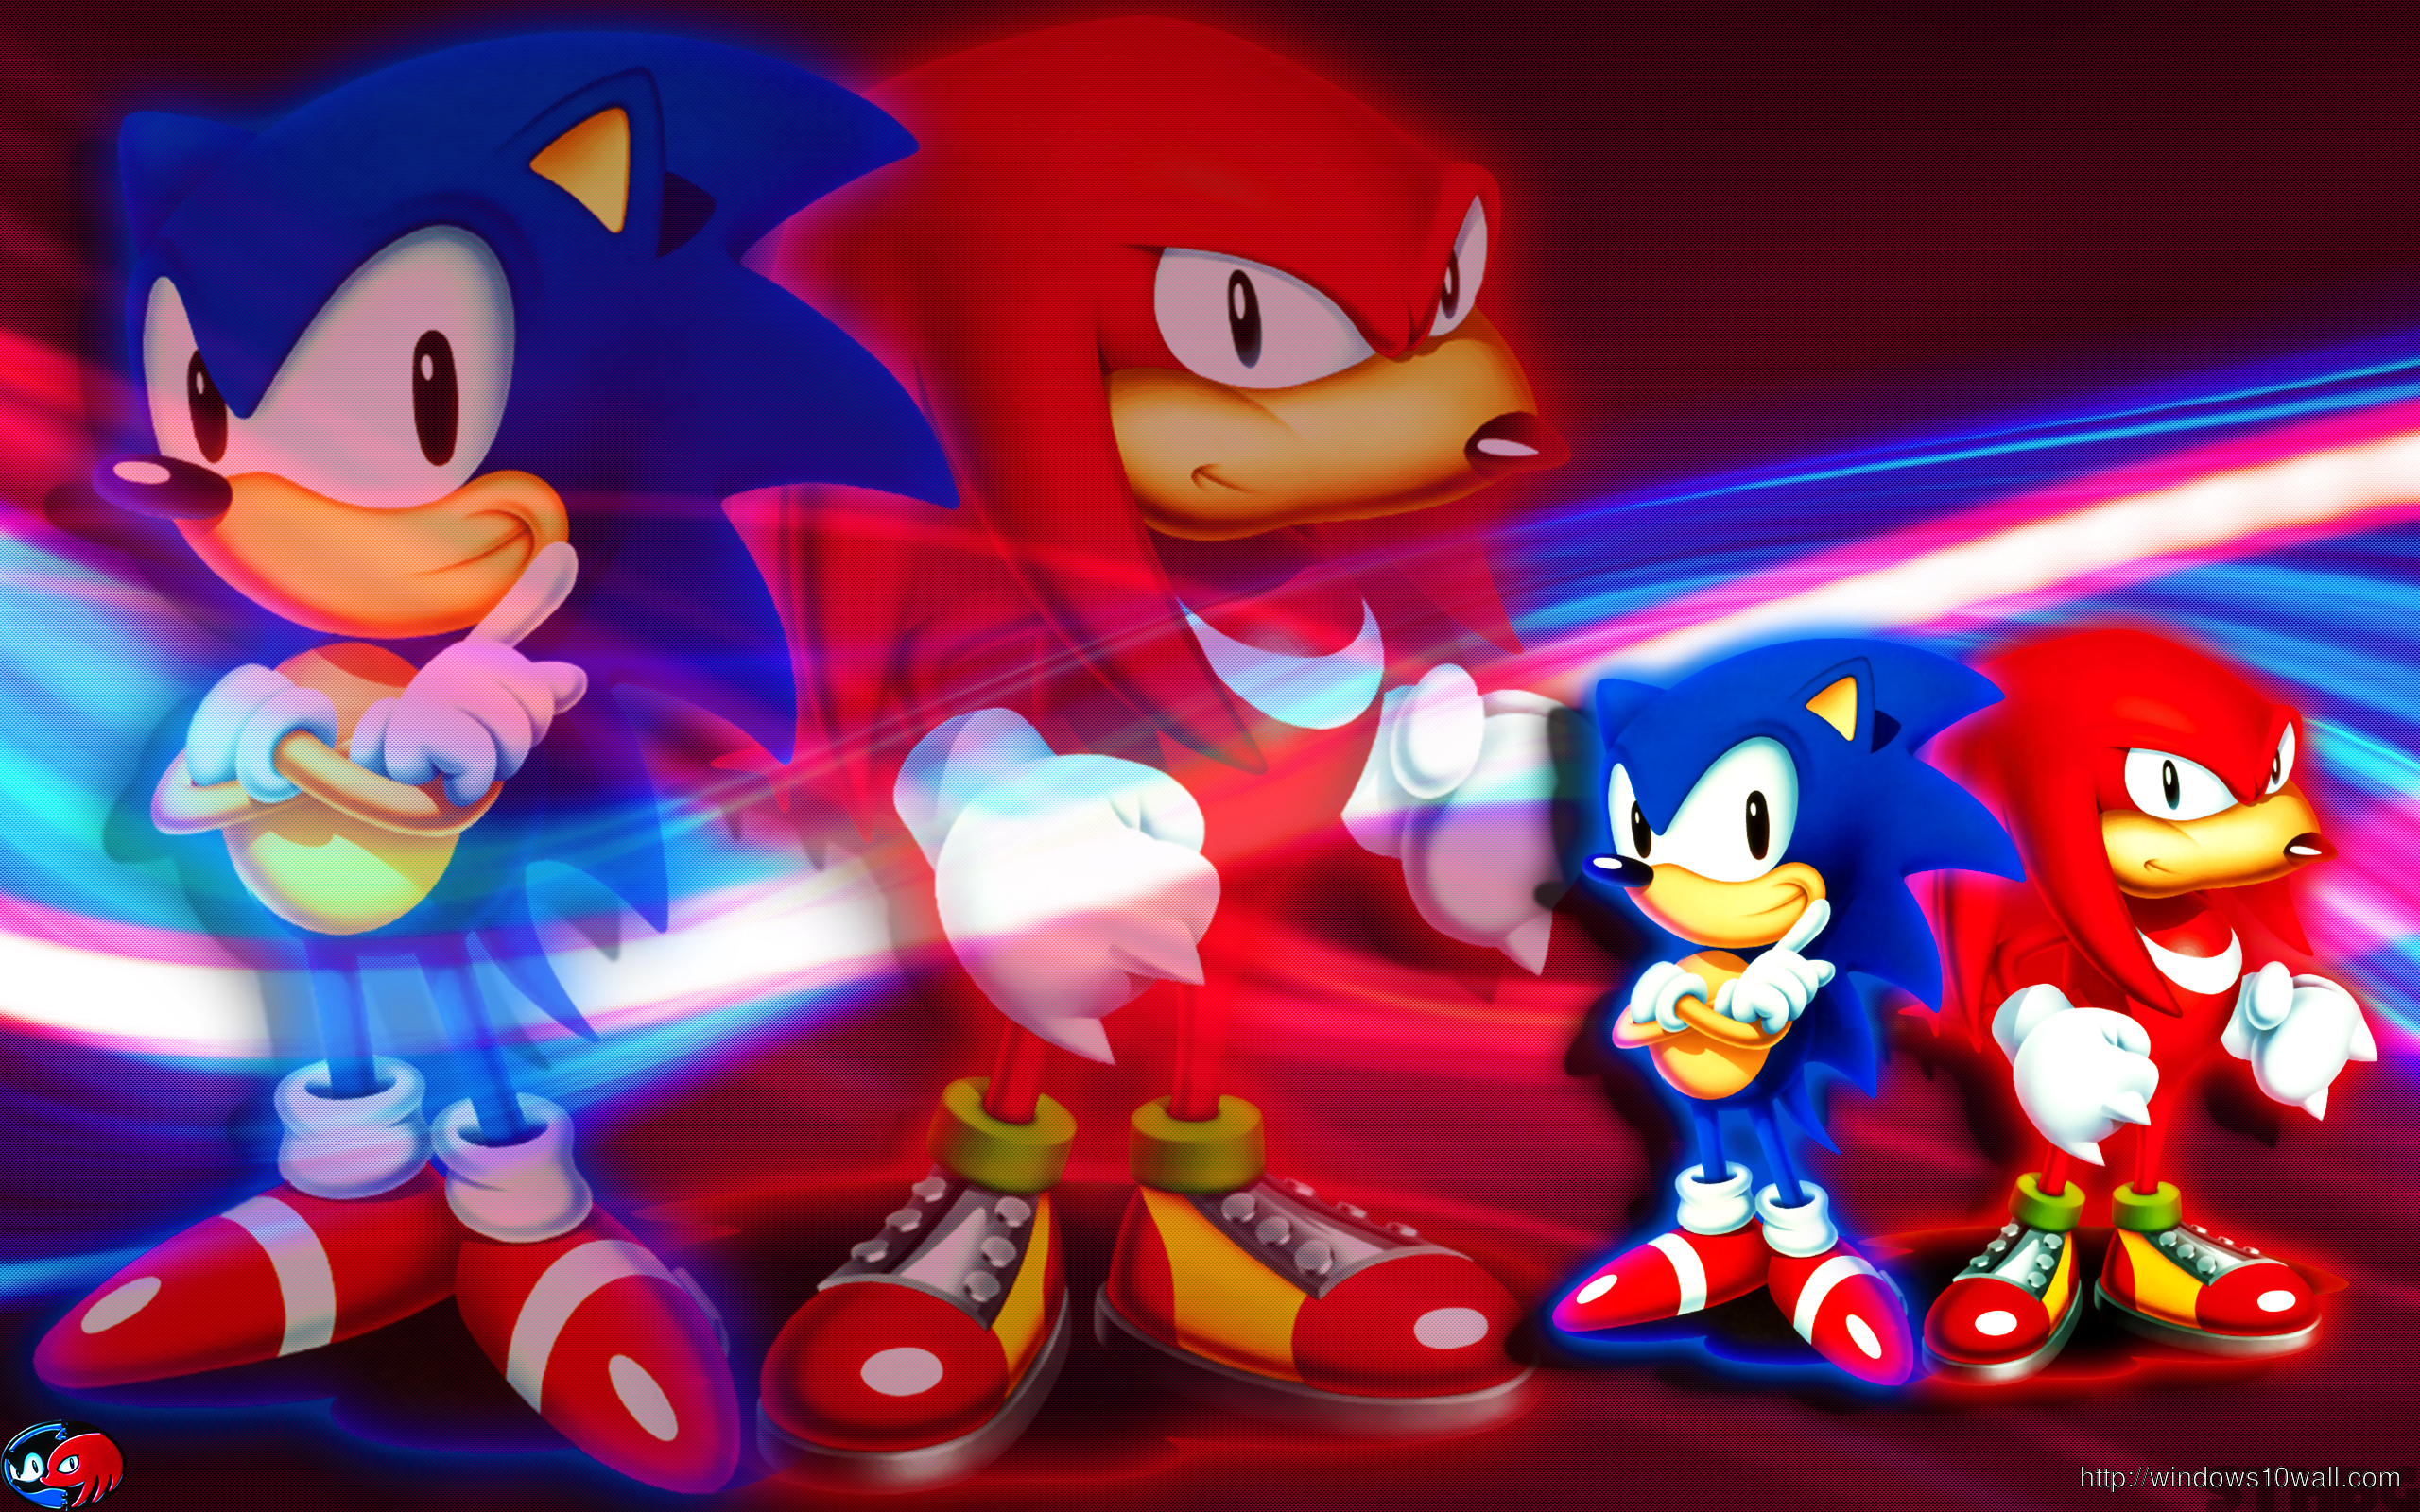 Sonic And Knuckles Wallpaper